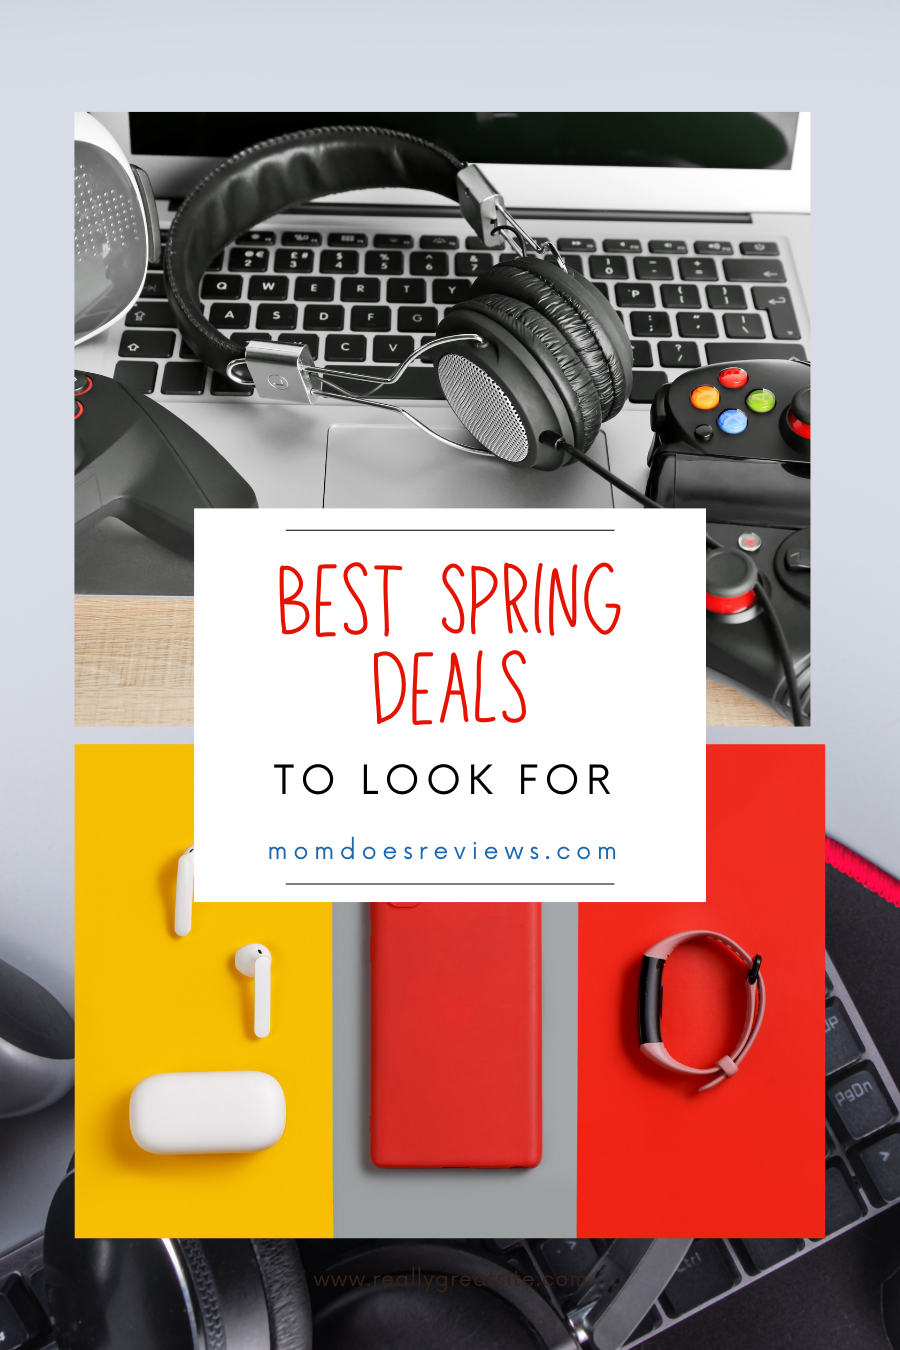 Best Spring Deals to Look Out For